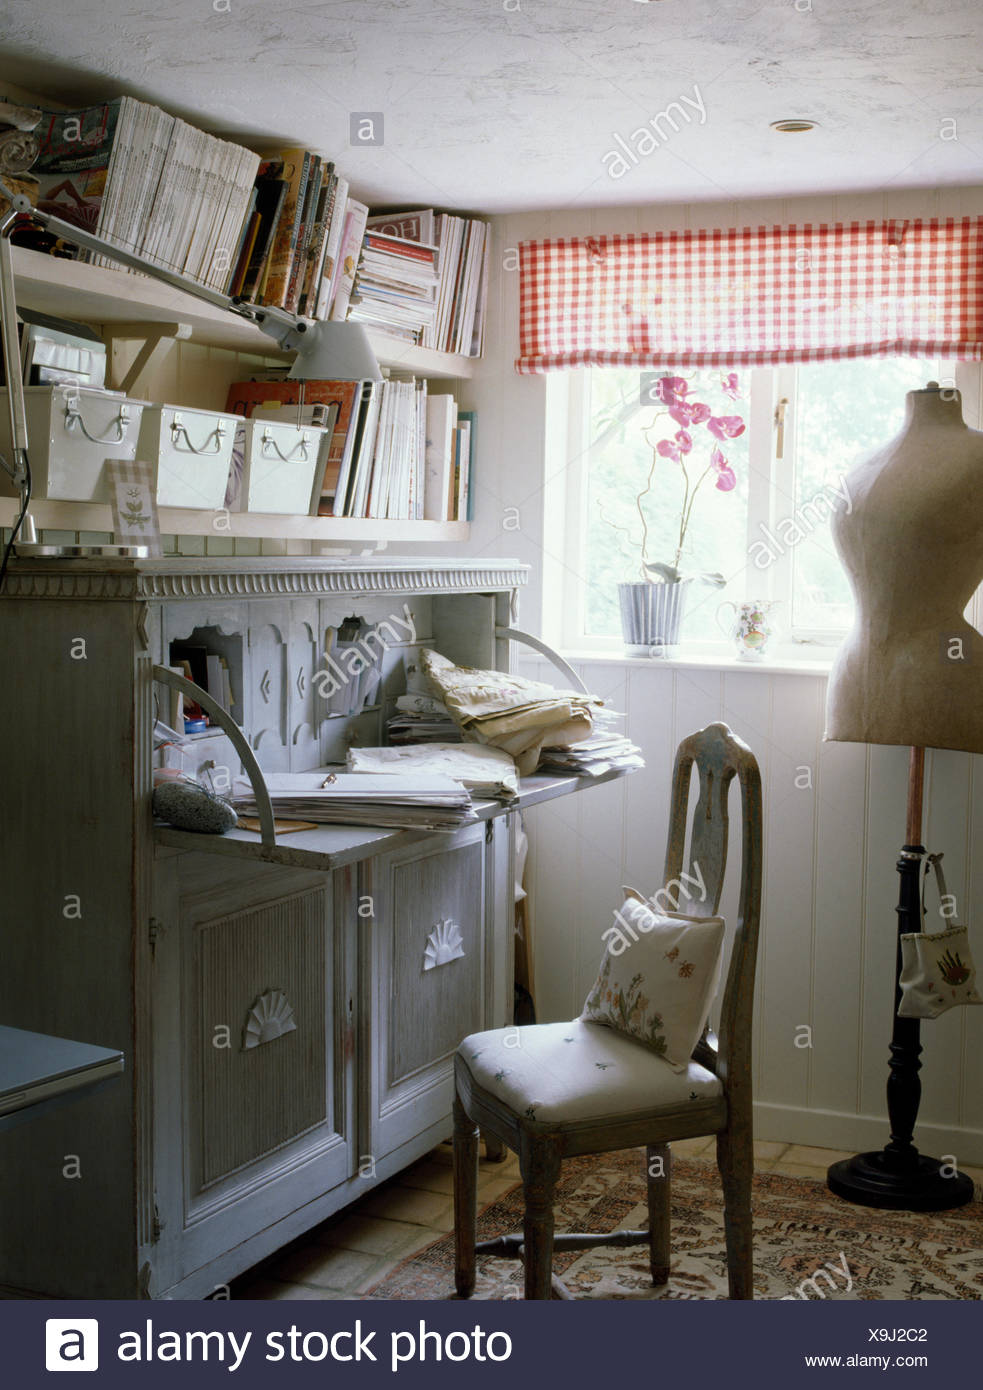 Tailor S Dummy In Small Sewing Room With Painted Cabinet Below